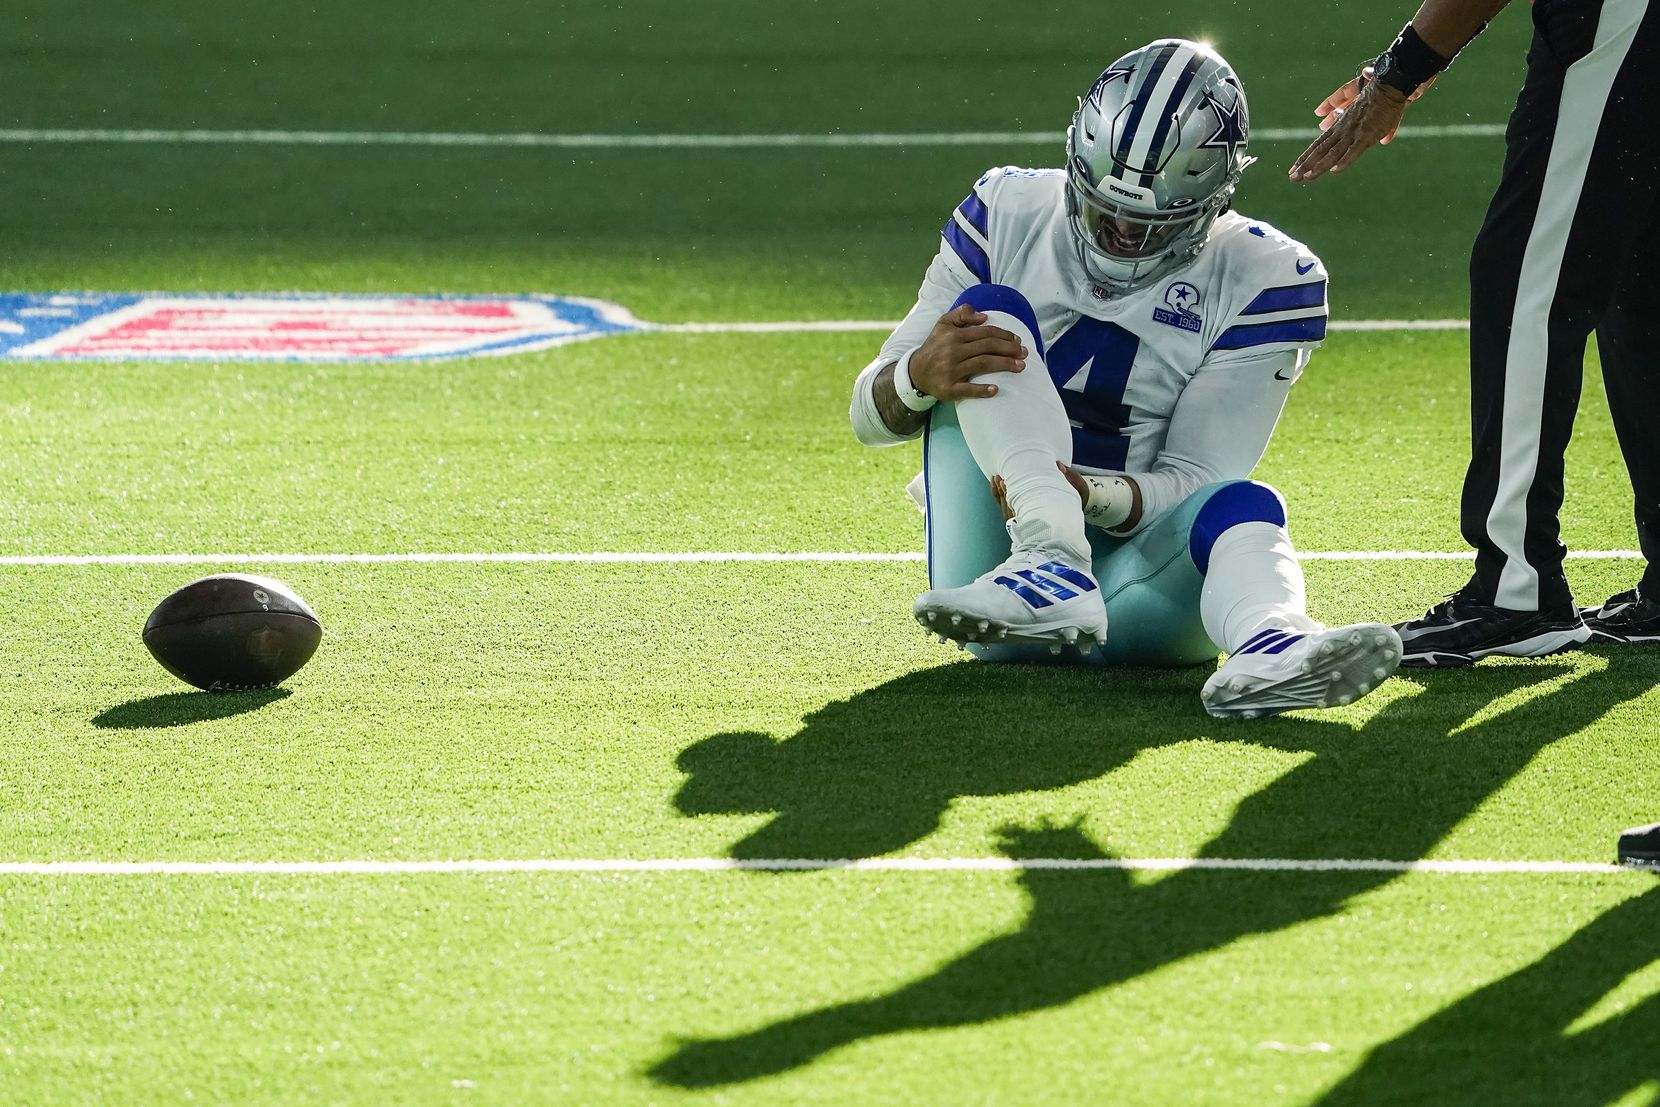 Dallas Cowboys quarterback Dak Prescott waits for medical attention after being injured on a tackle by New York Giants cornerback Logan Ryan during the third quarter of an NFL football game at AT&T Stadium on Sunday, Oct. 11, 2020, in Arlington. Prescott was injured o the play when Ryan came down on his right leg and left the game. (Smiley N. Pool/The Dallas Morning News)